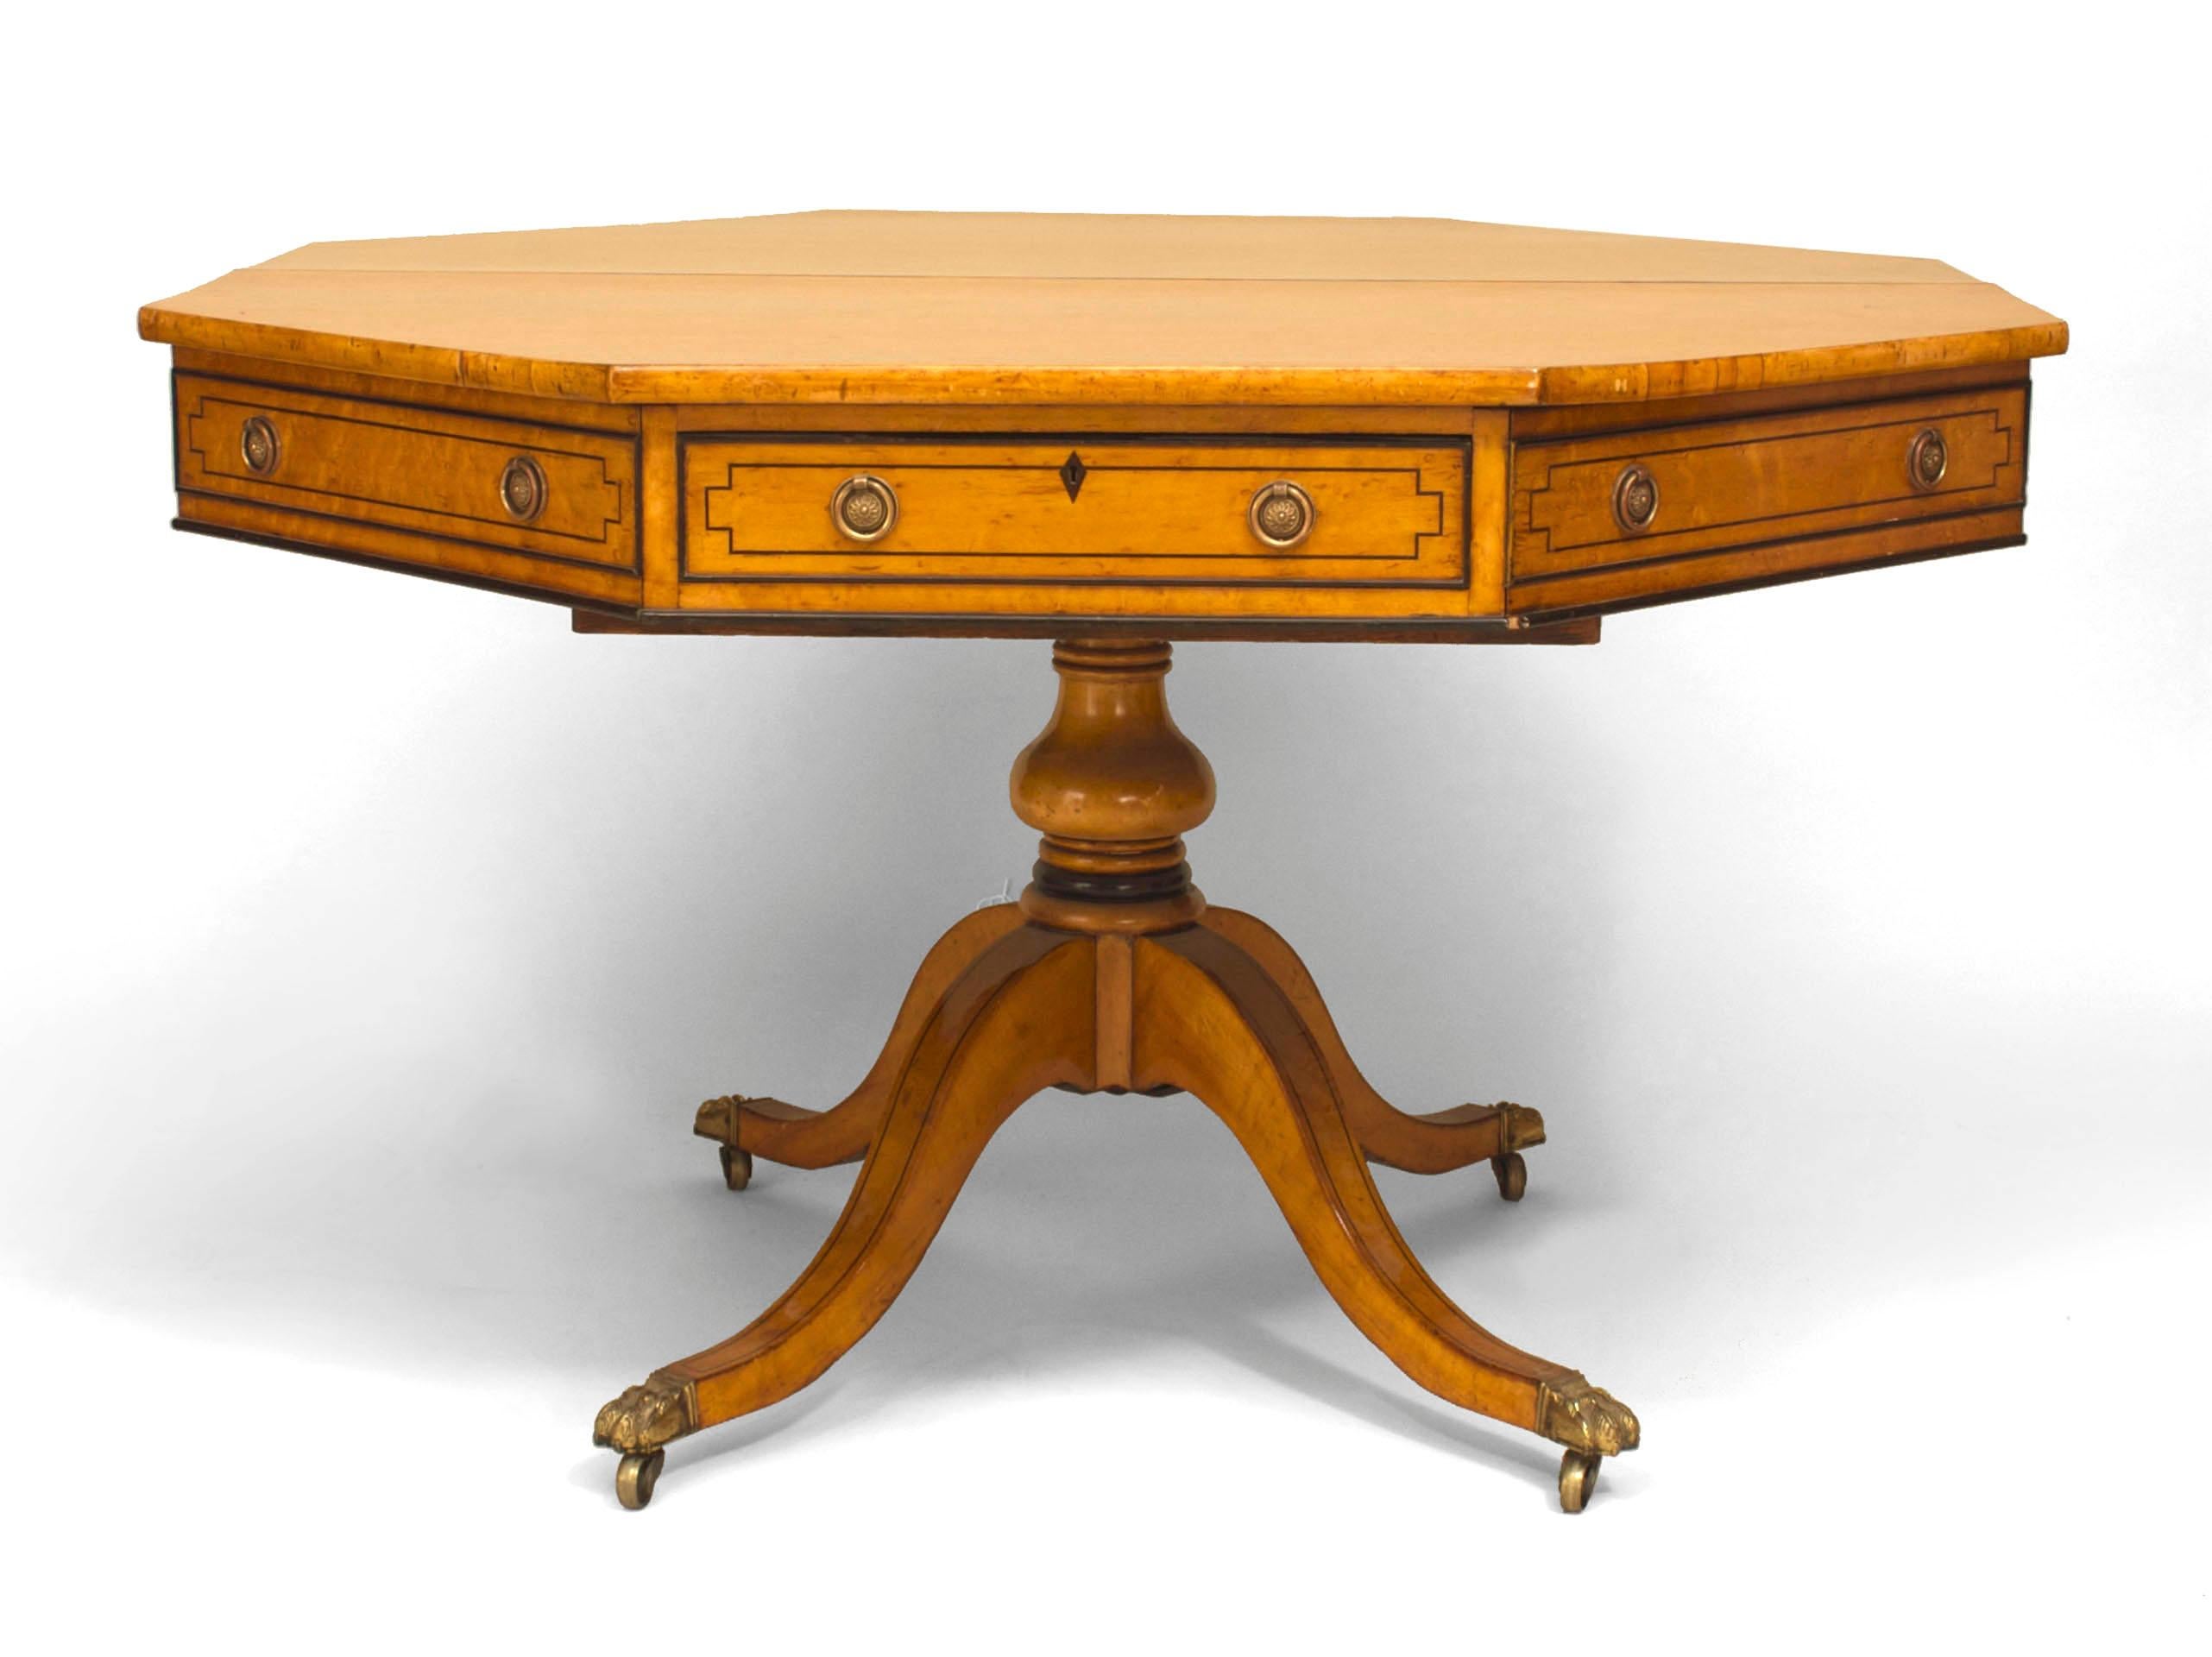 English Regency style (mid-19th Century) octagonal maple pedestal base center table with two drawers and resting on a pedestal base with 4 legs. (stamped: BLAIN & SON/ LIVERPOOL)
